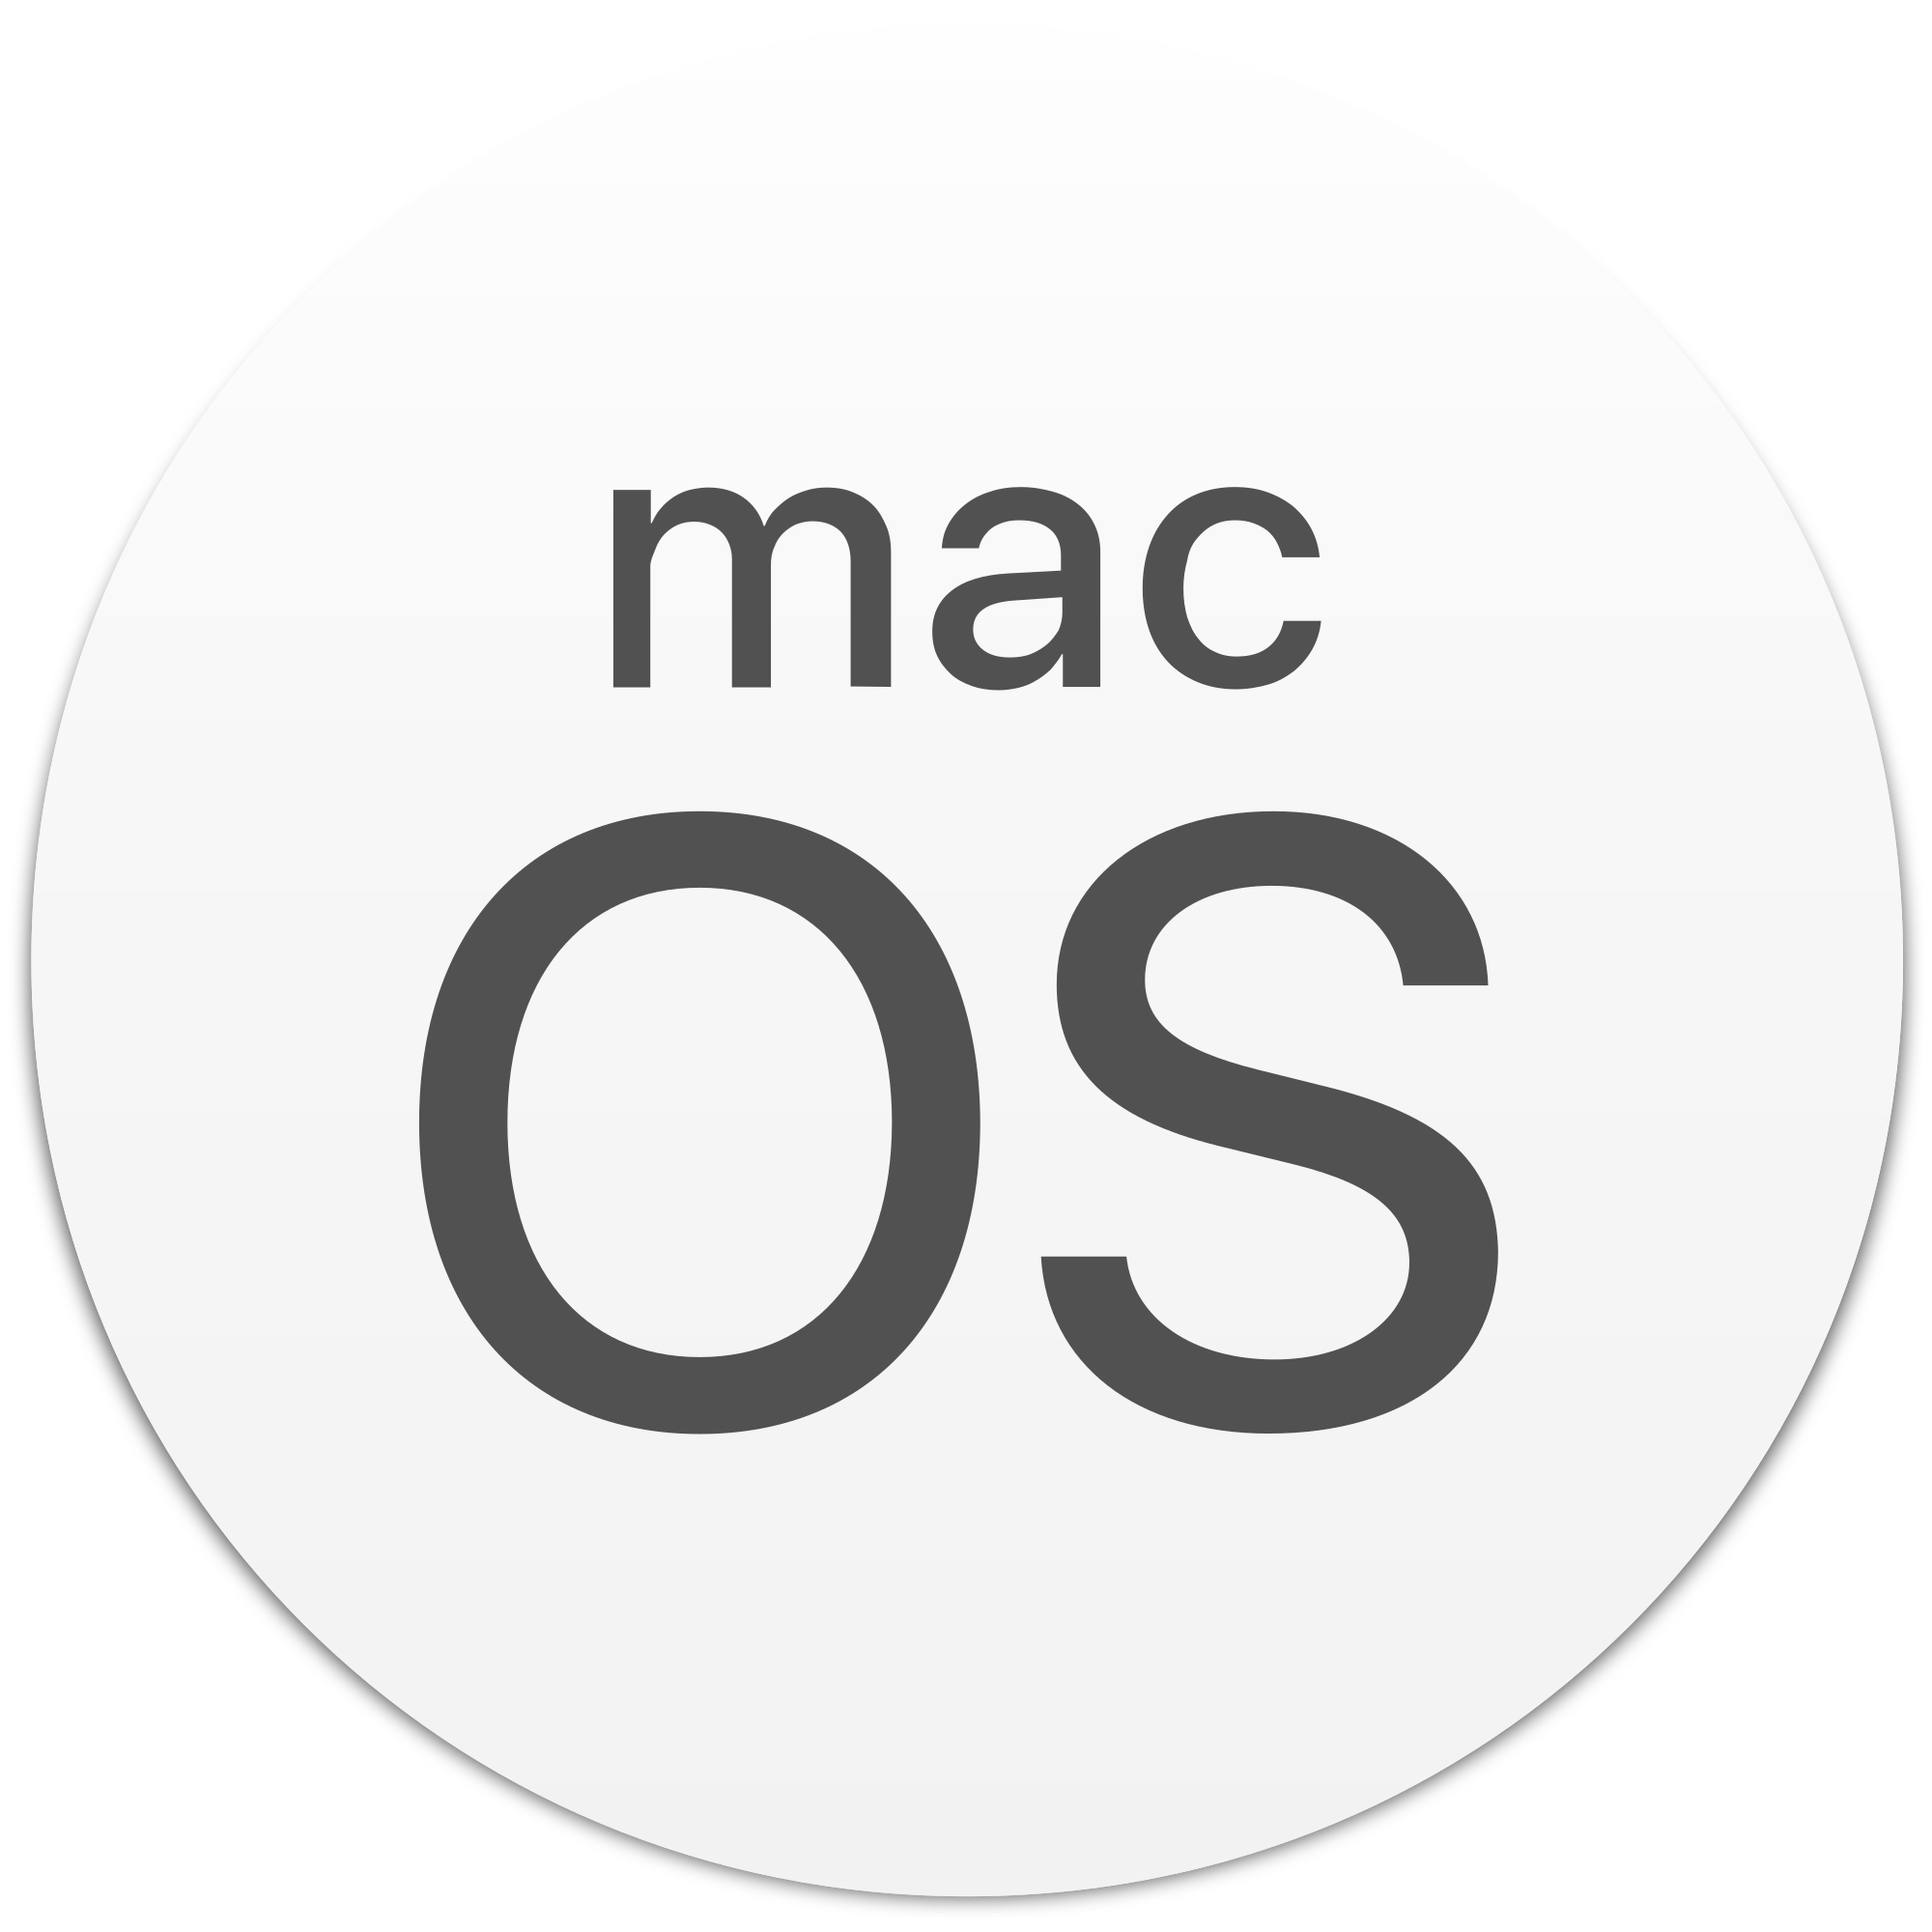 wget for mac os x download